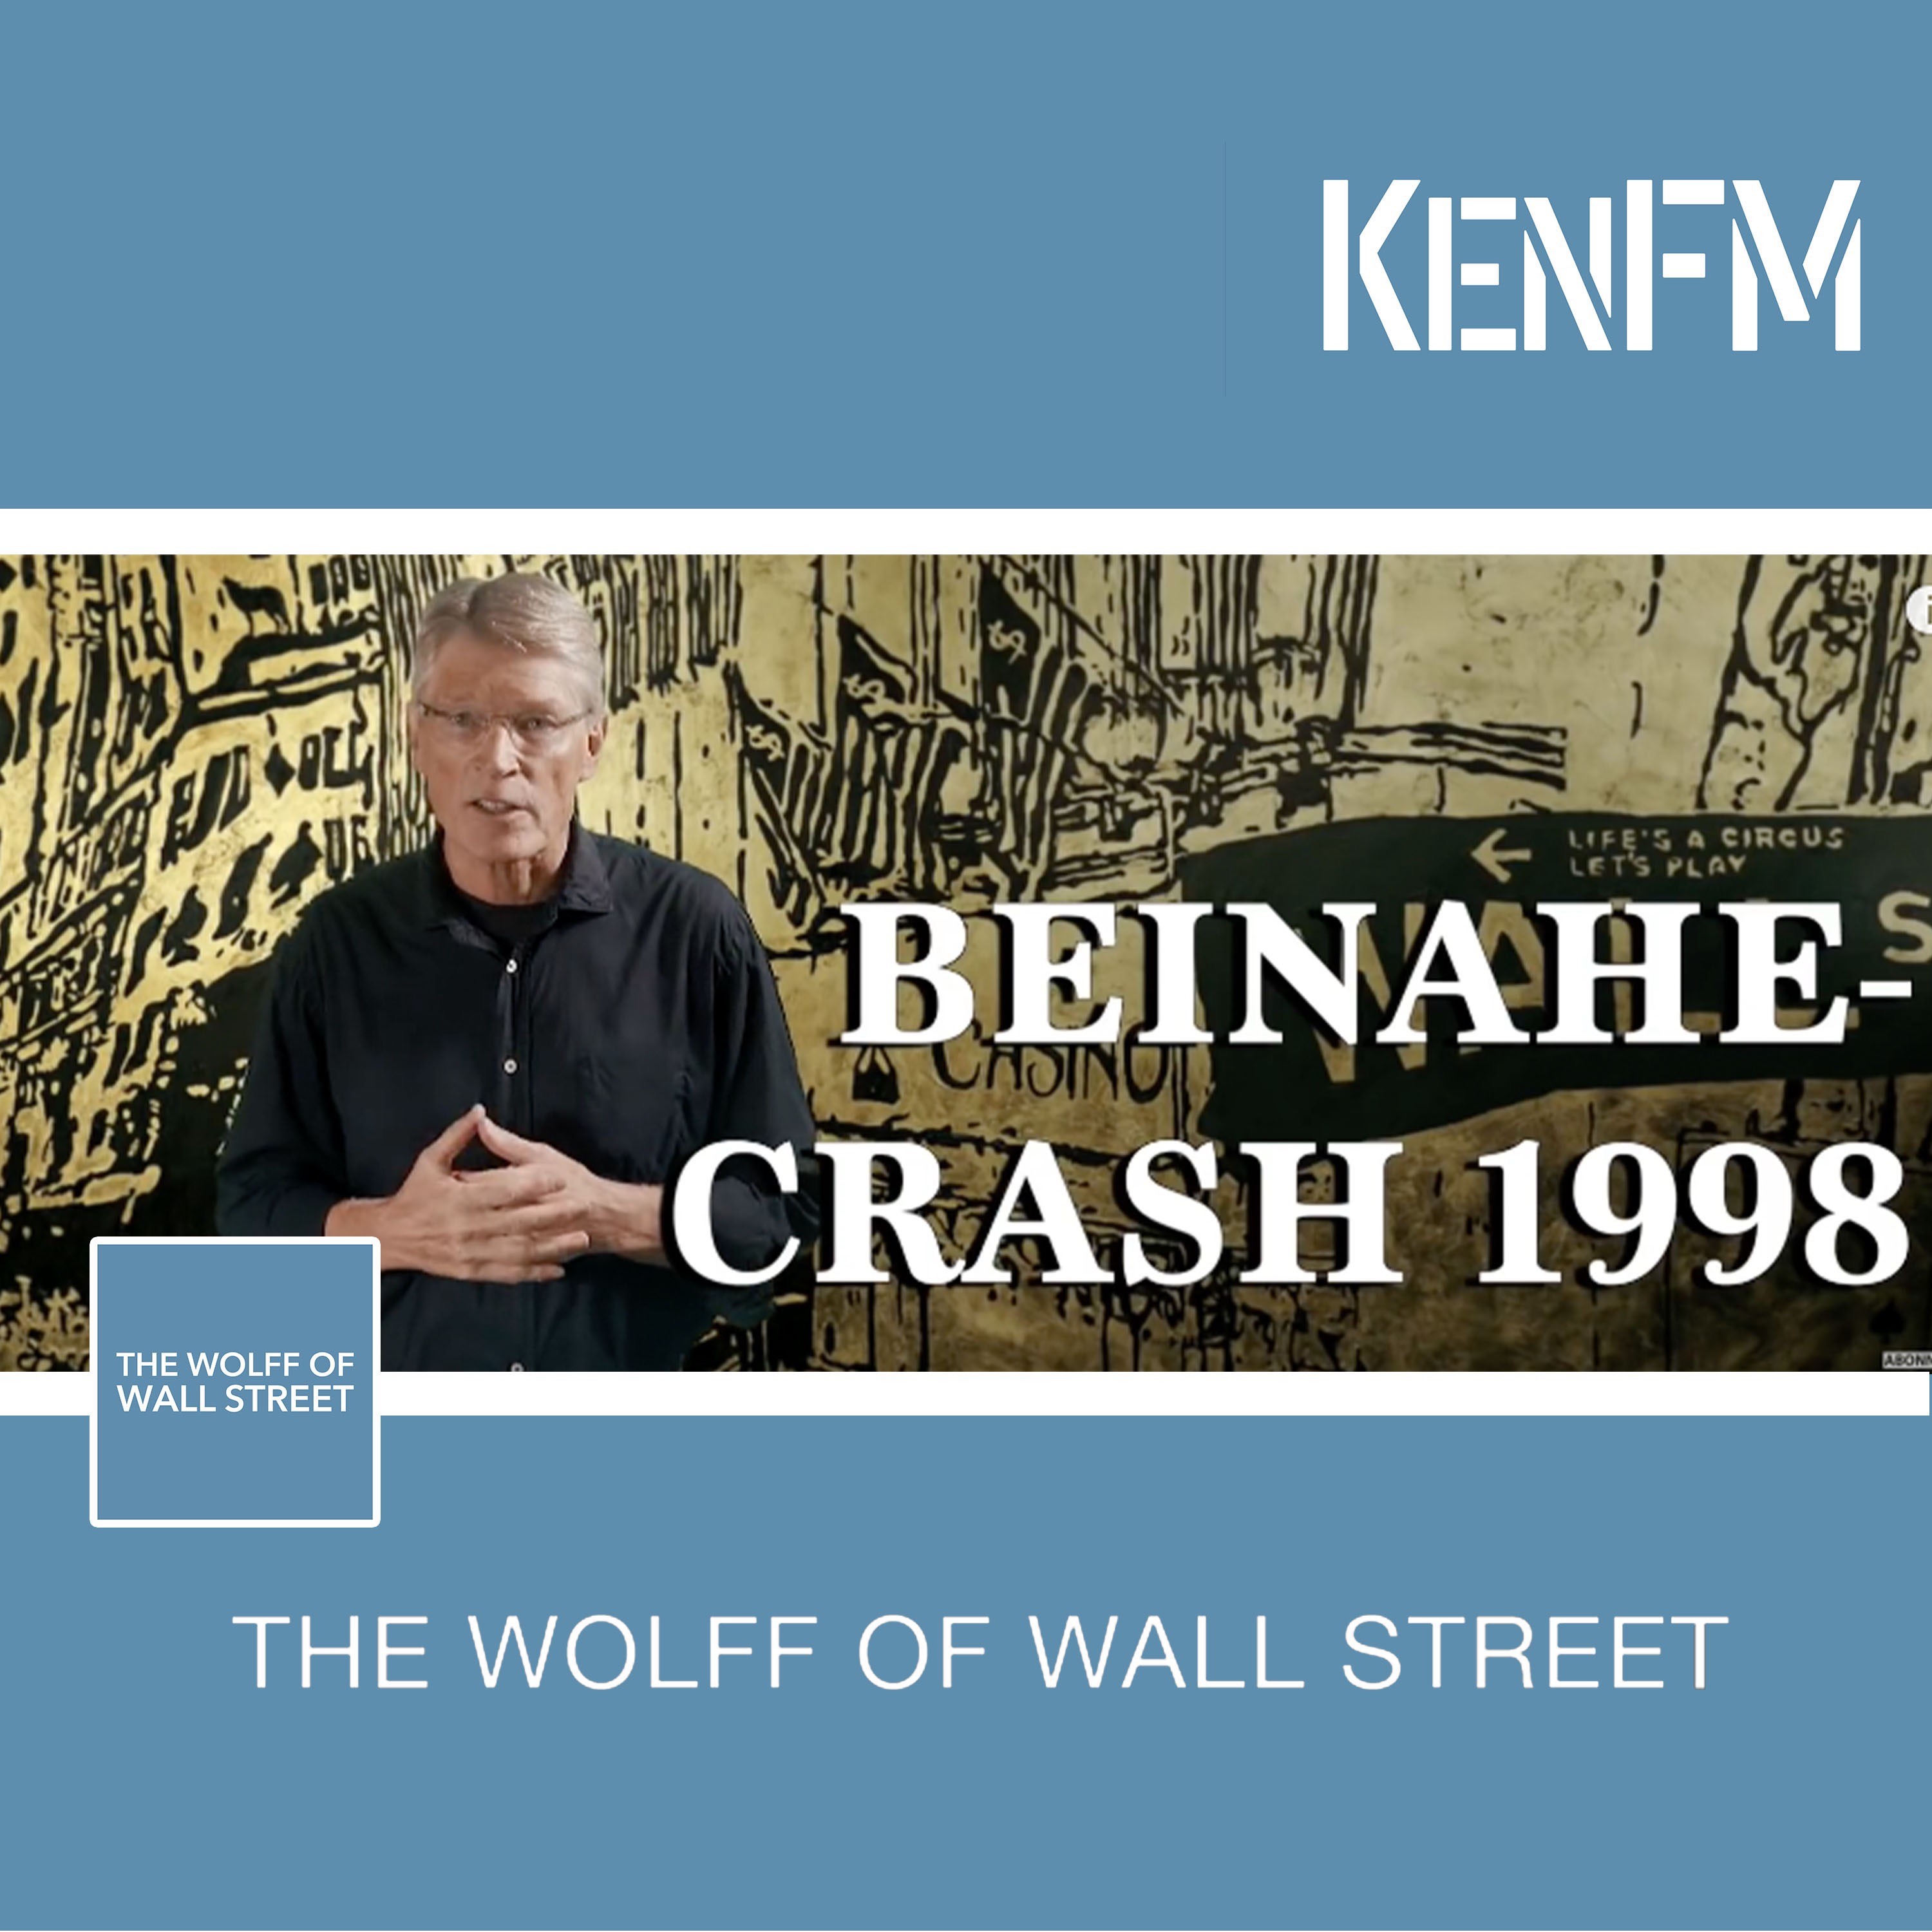 The Wolff of Wall Street: Beinahe-Crash 1998